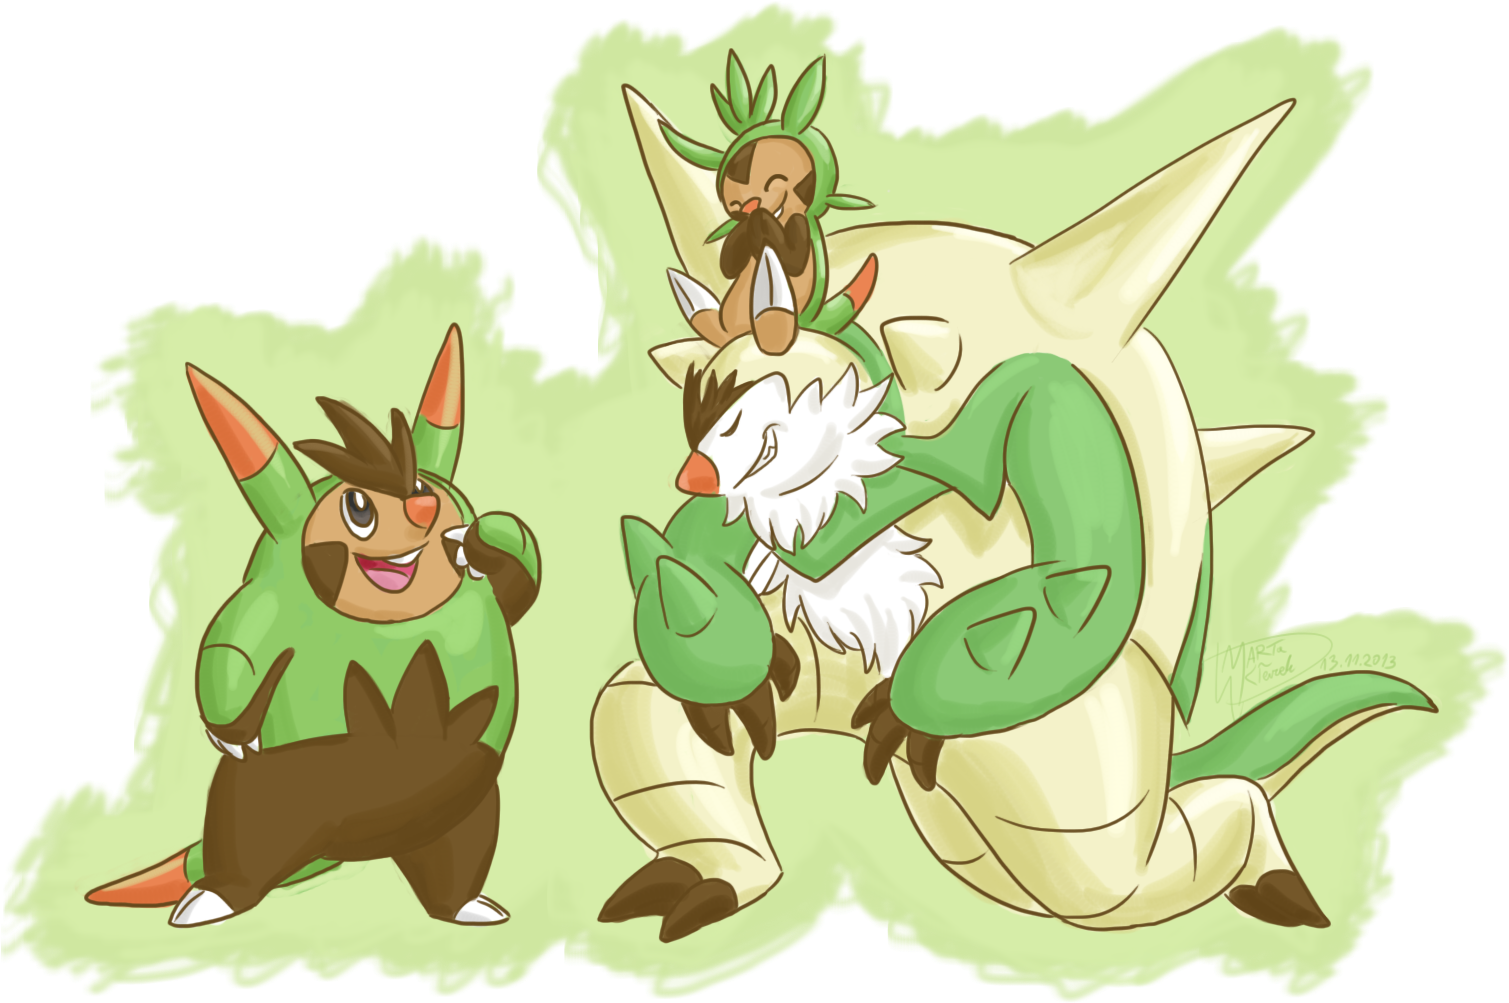 I Will Evolve Into You By Weirda S M Art - Imagens De Chespin Quilladin E C...